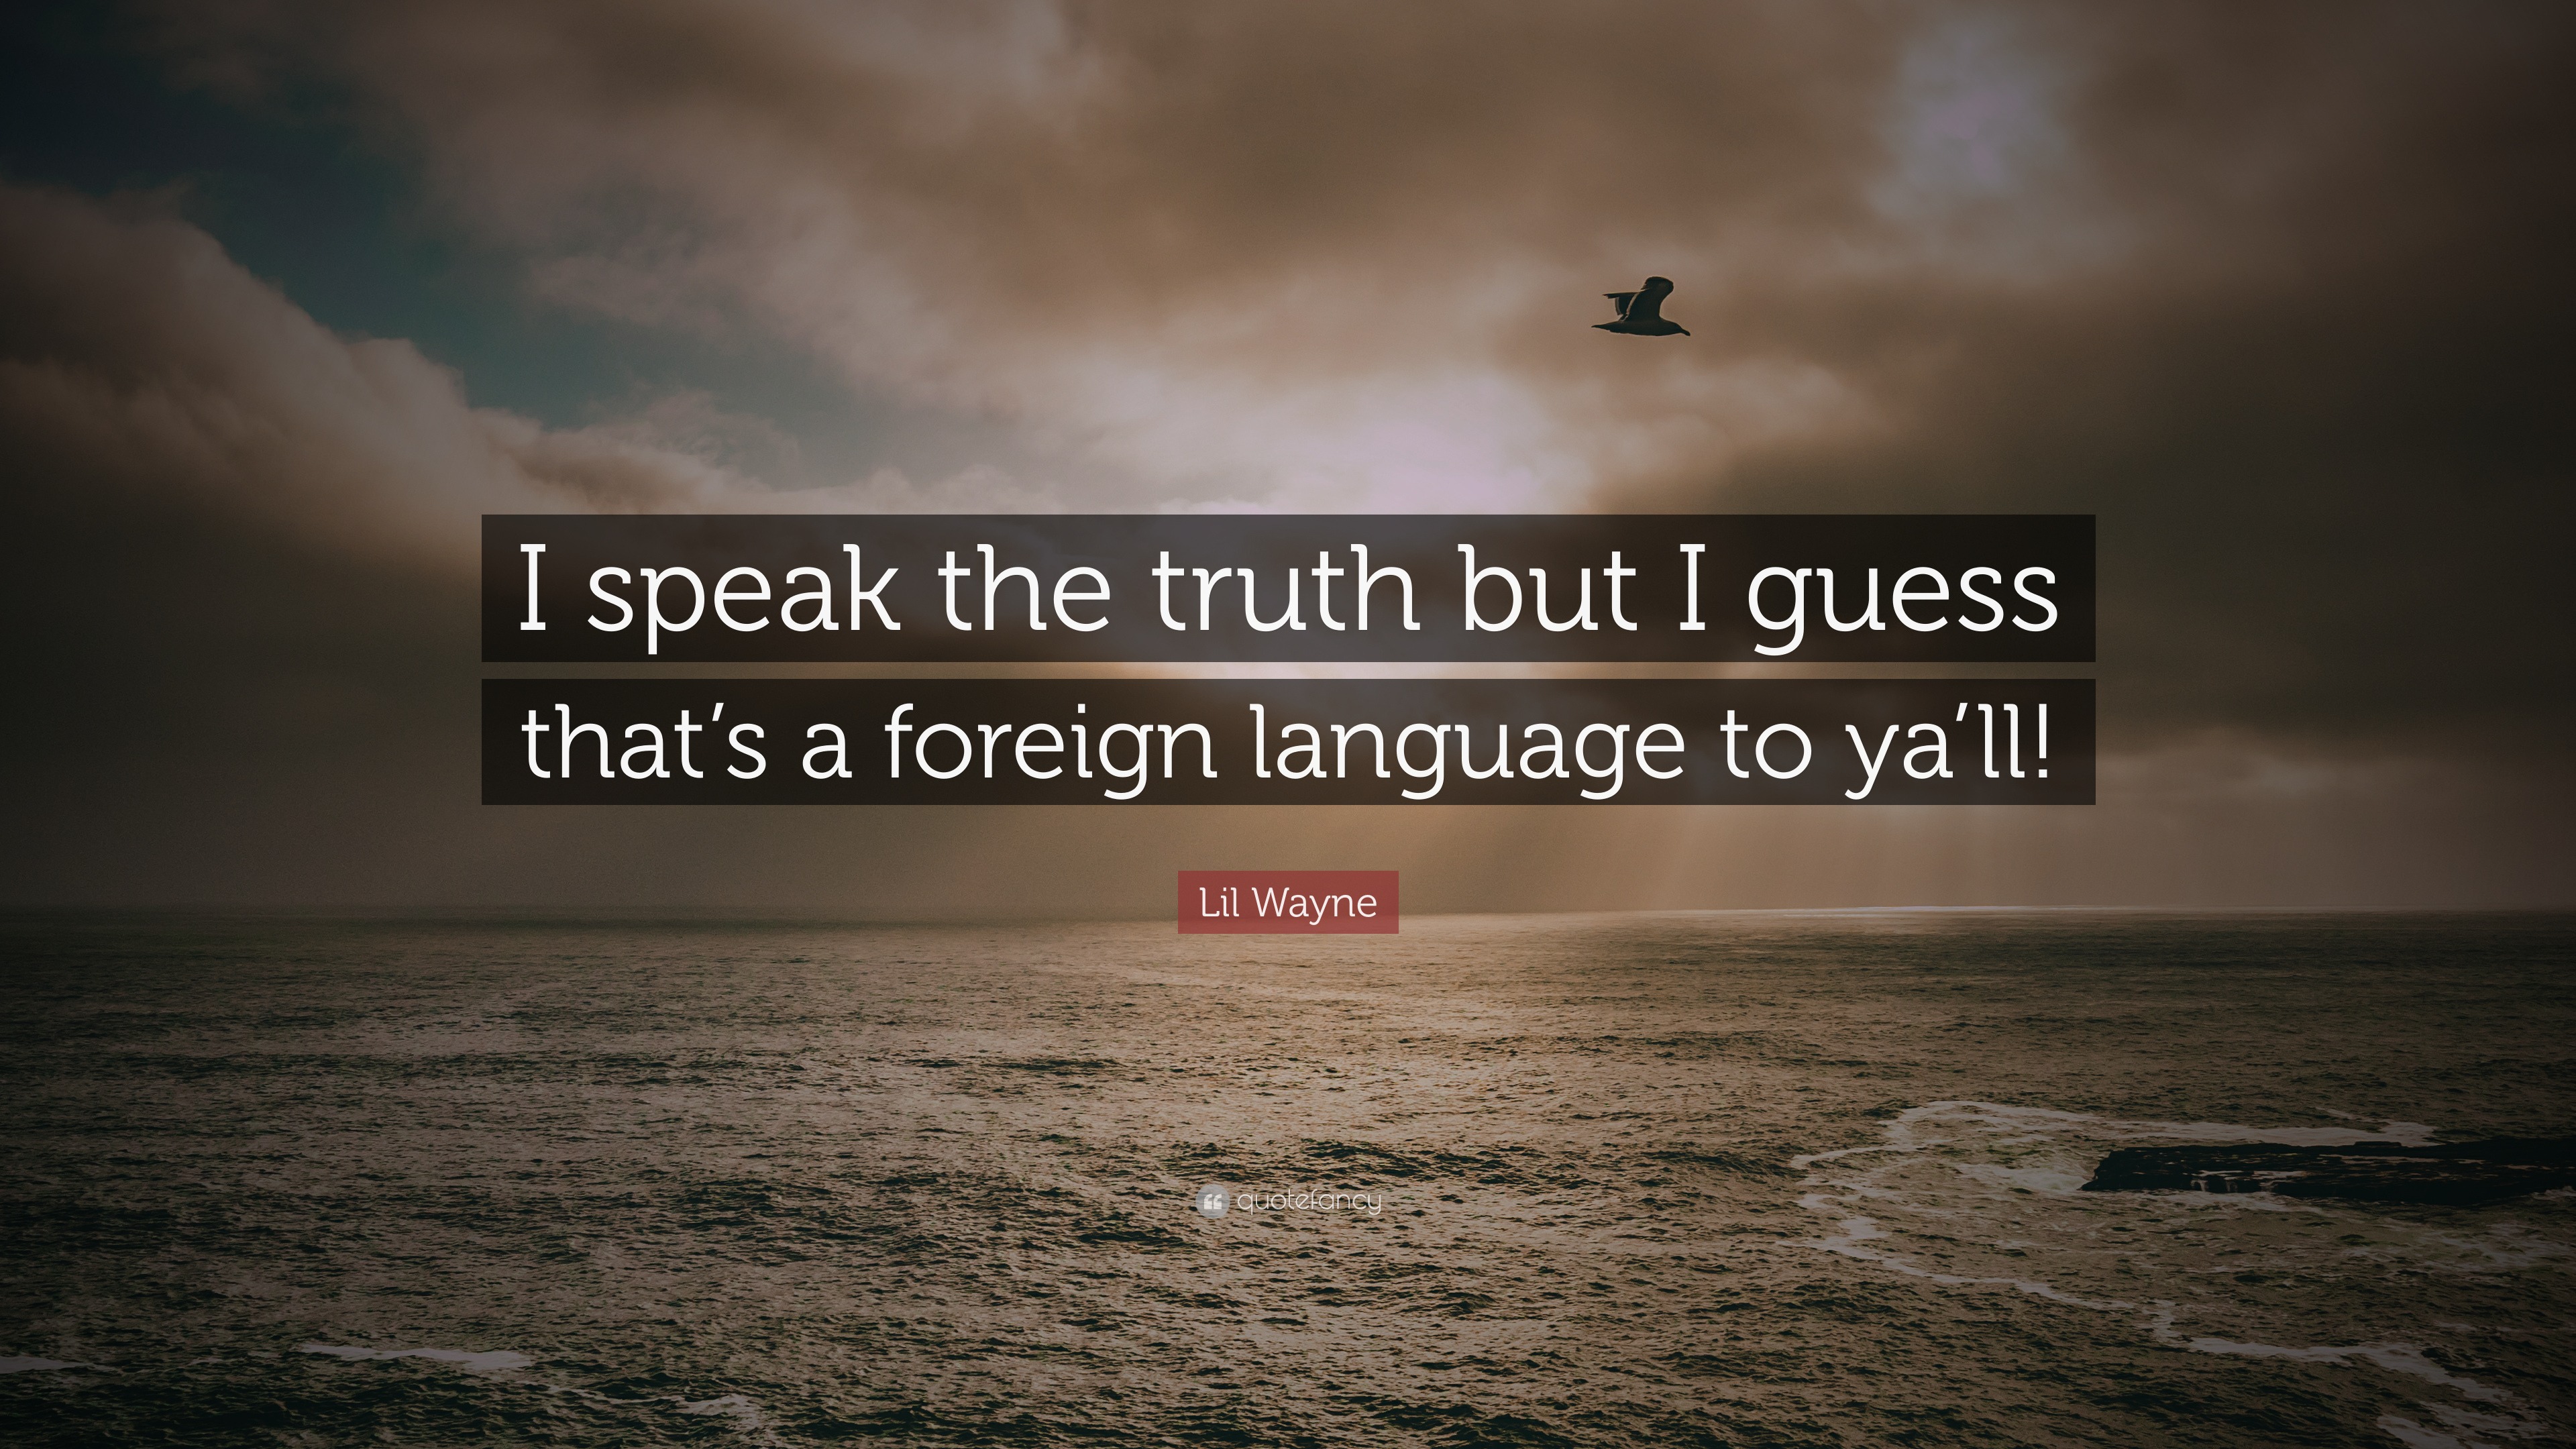 Lil Wayne Quote: “I speak truth but guess that's a foreign language to